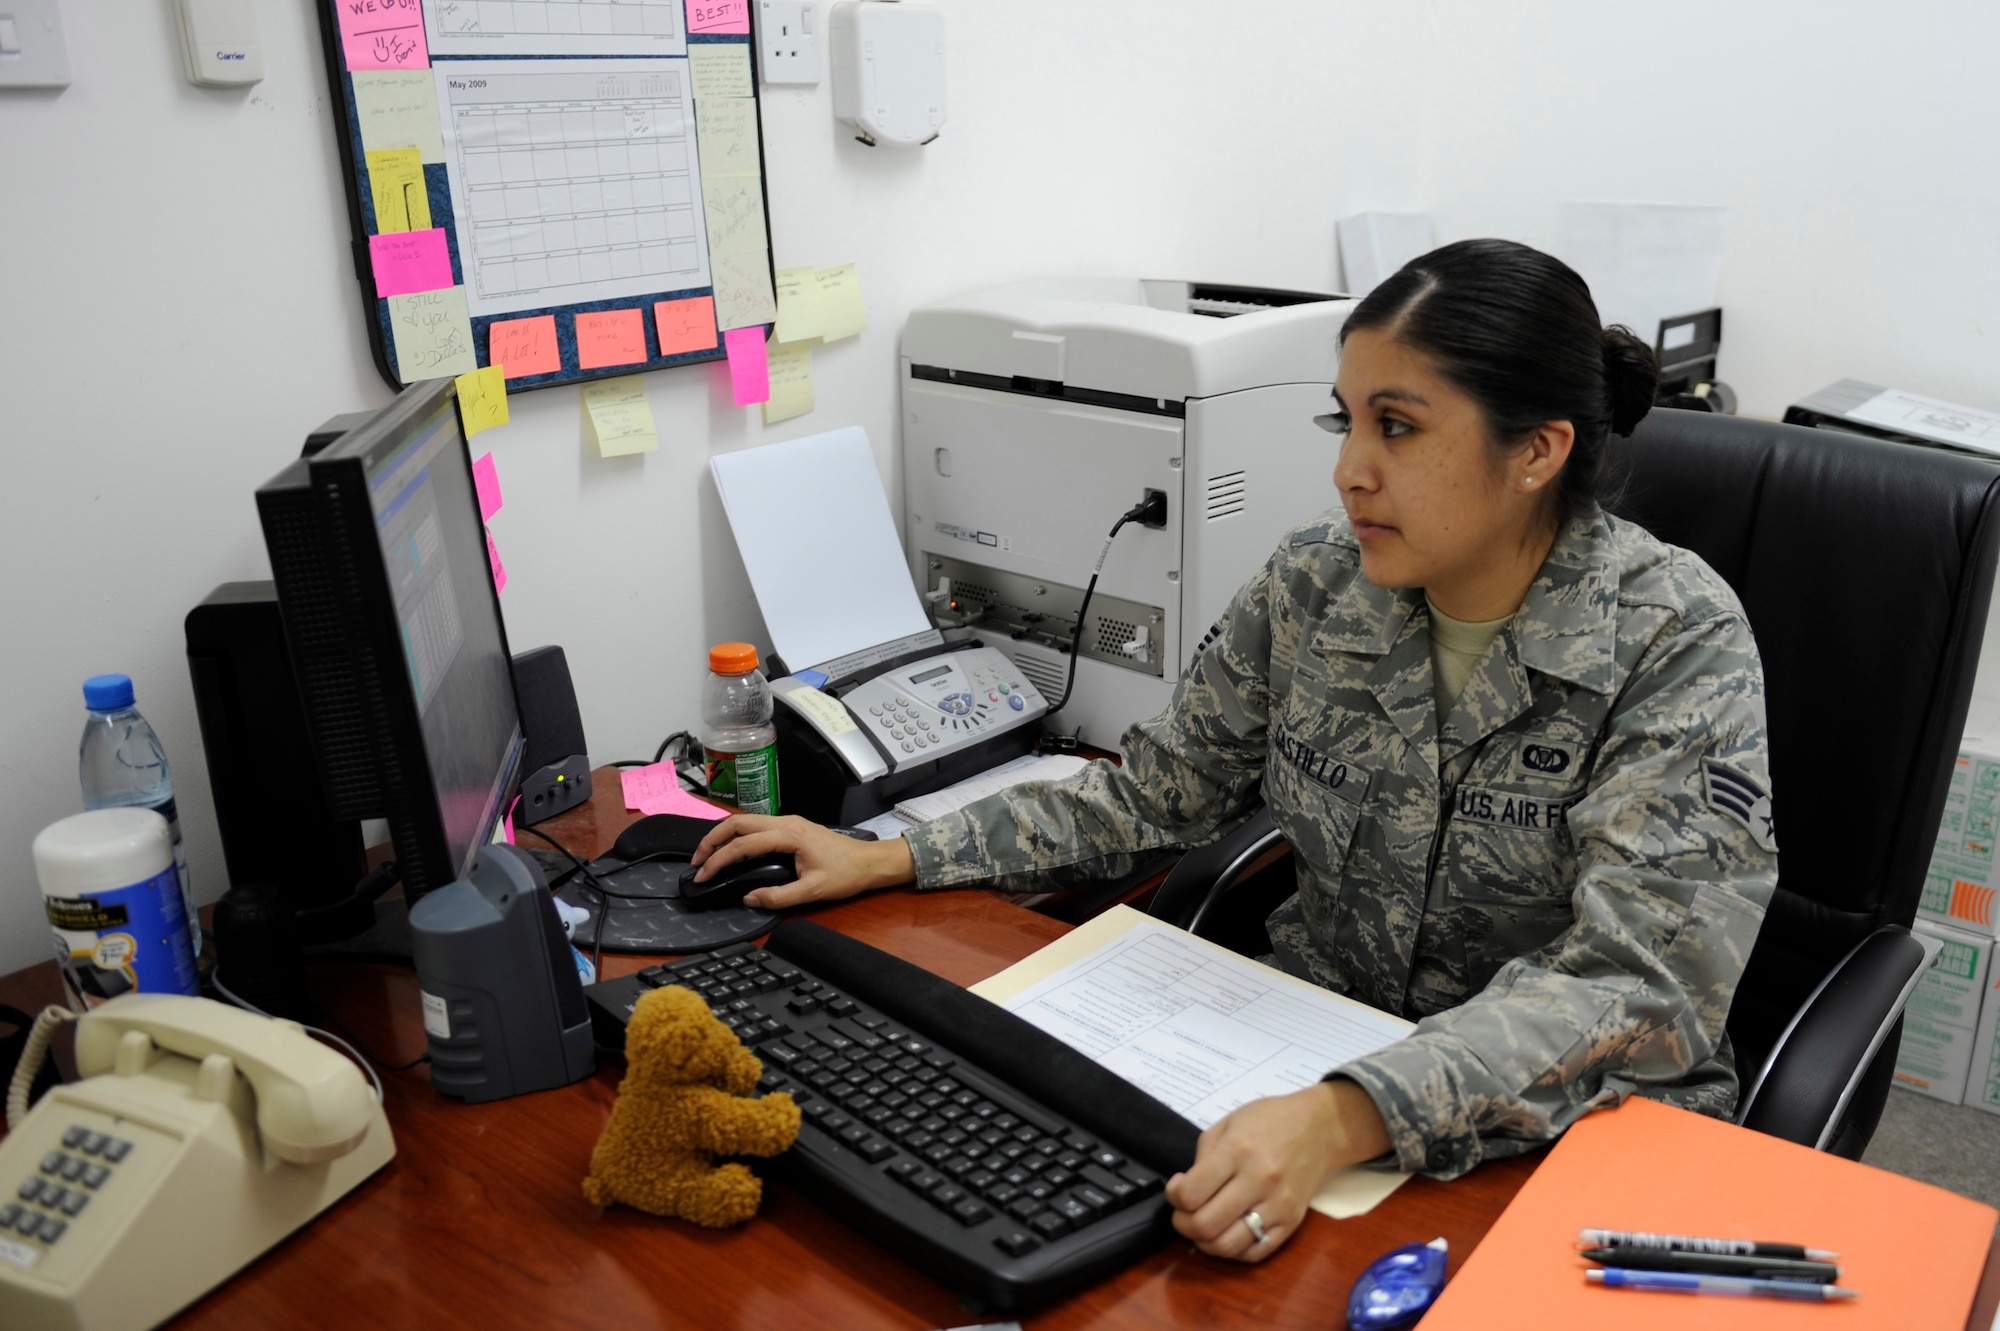 Senior Airman Jessica Castillo, 963rd Expeditionary Airborne Air Control squadron aviation resource manager, reviews flight mission packages prior to an upcoming Operation Enduring Freedom mission. Airman Castillo is deployed from Tinker AFB, Okla., and hails from San Bentio, Texas.